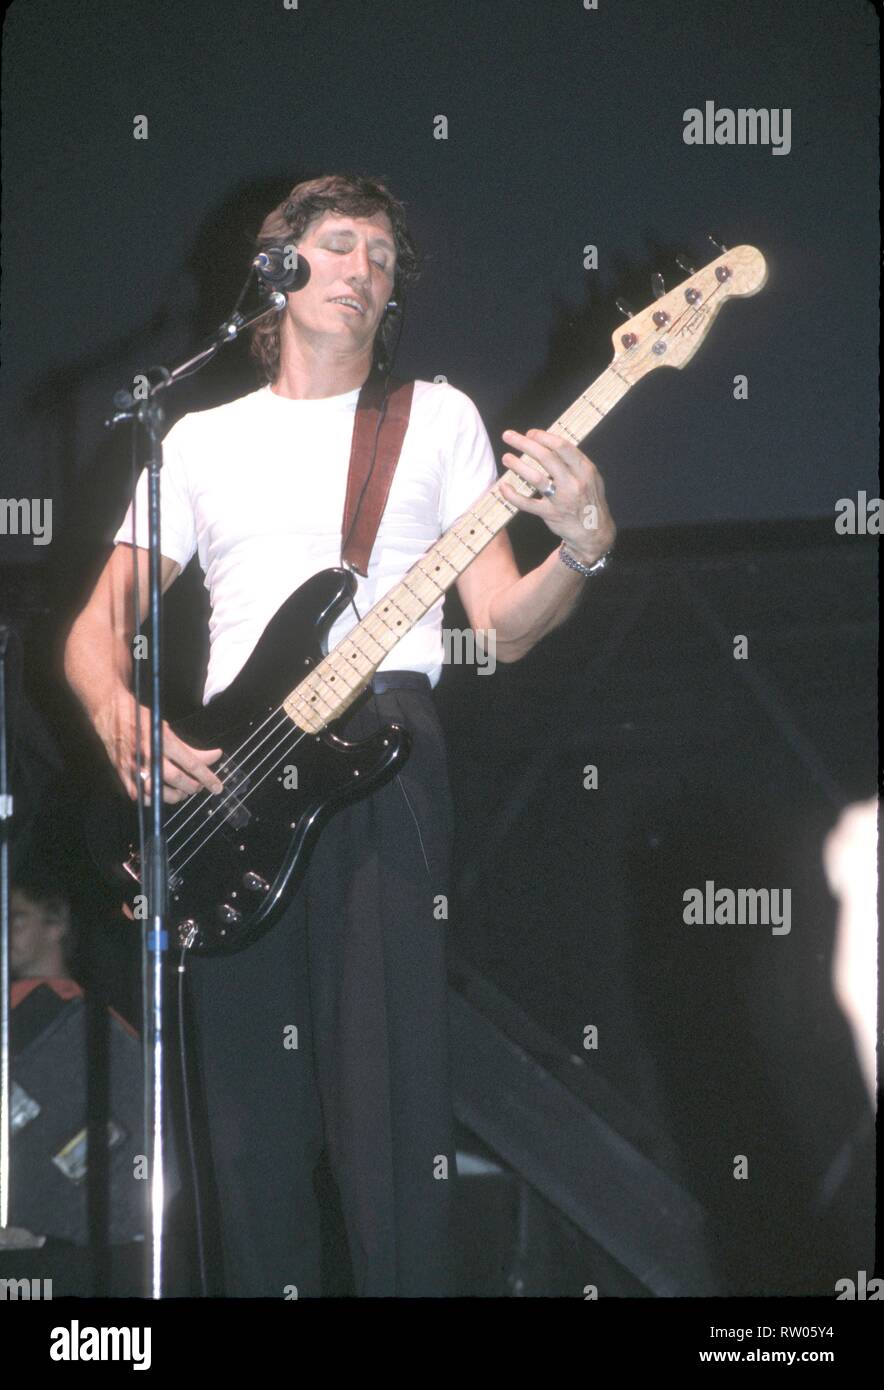 Singer, songwriter and bassist Roger Waters, best known as the bass player and one of the main songwriters in the rock band Pink Floyd, is shown performing on stage during a 'live' concert appearance. Stock Photo